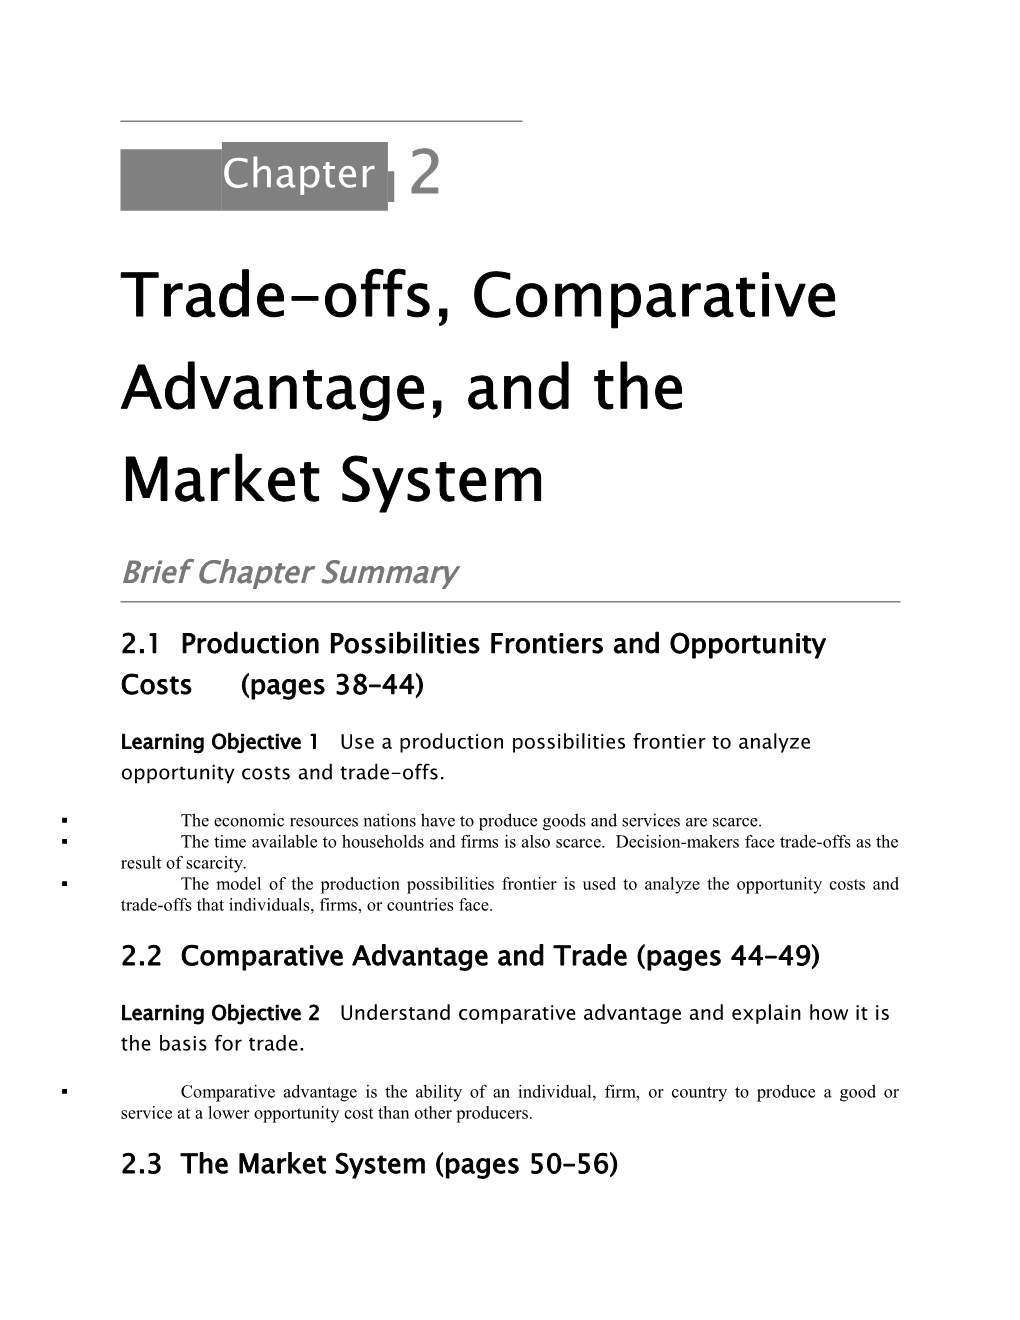 Trade-Offs, Comparative Advantage, and the Market System